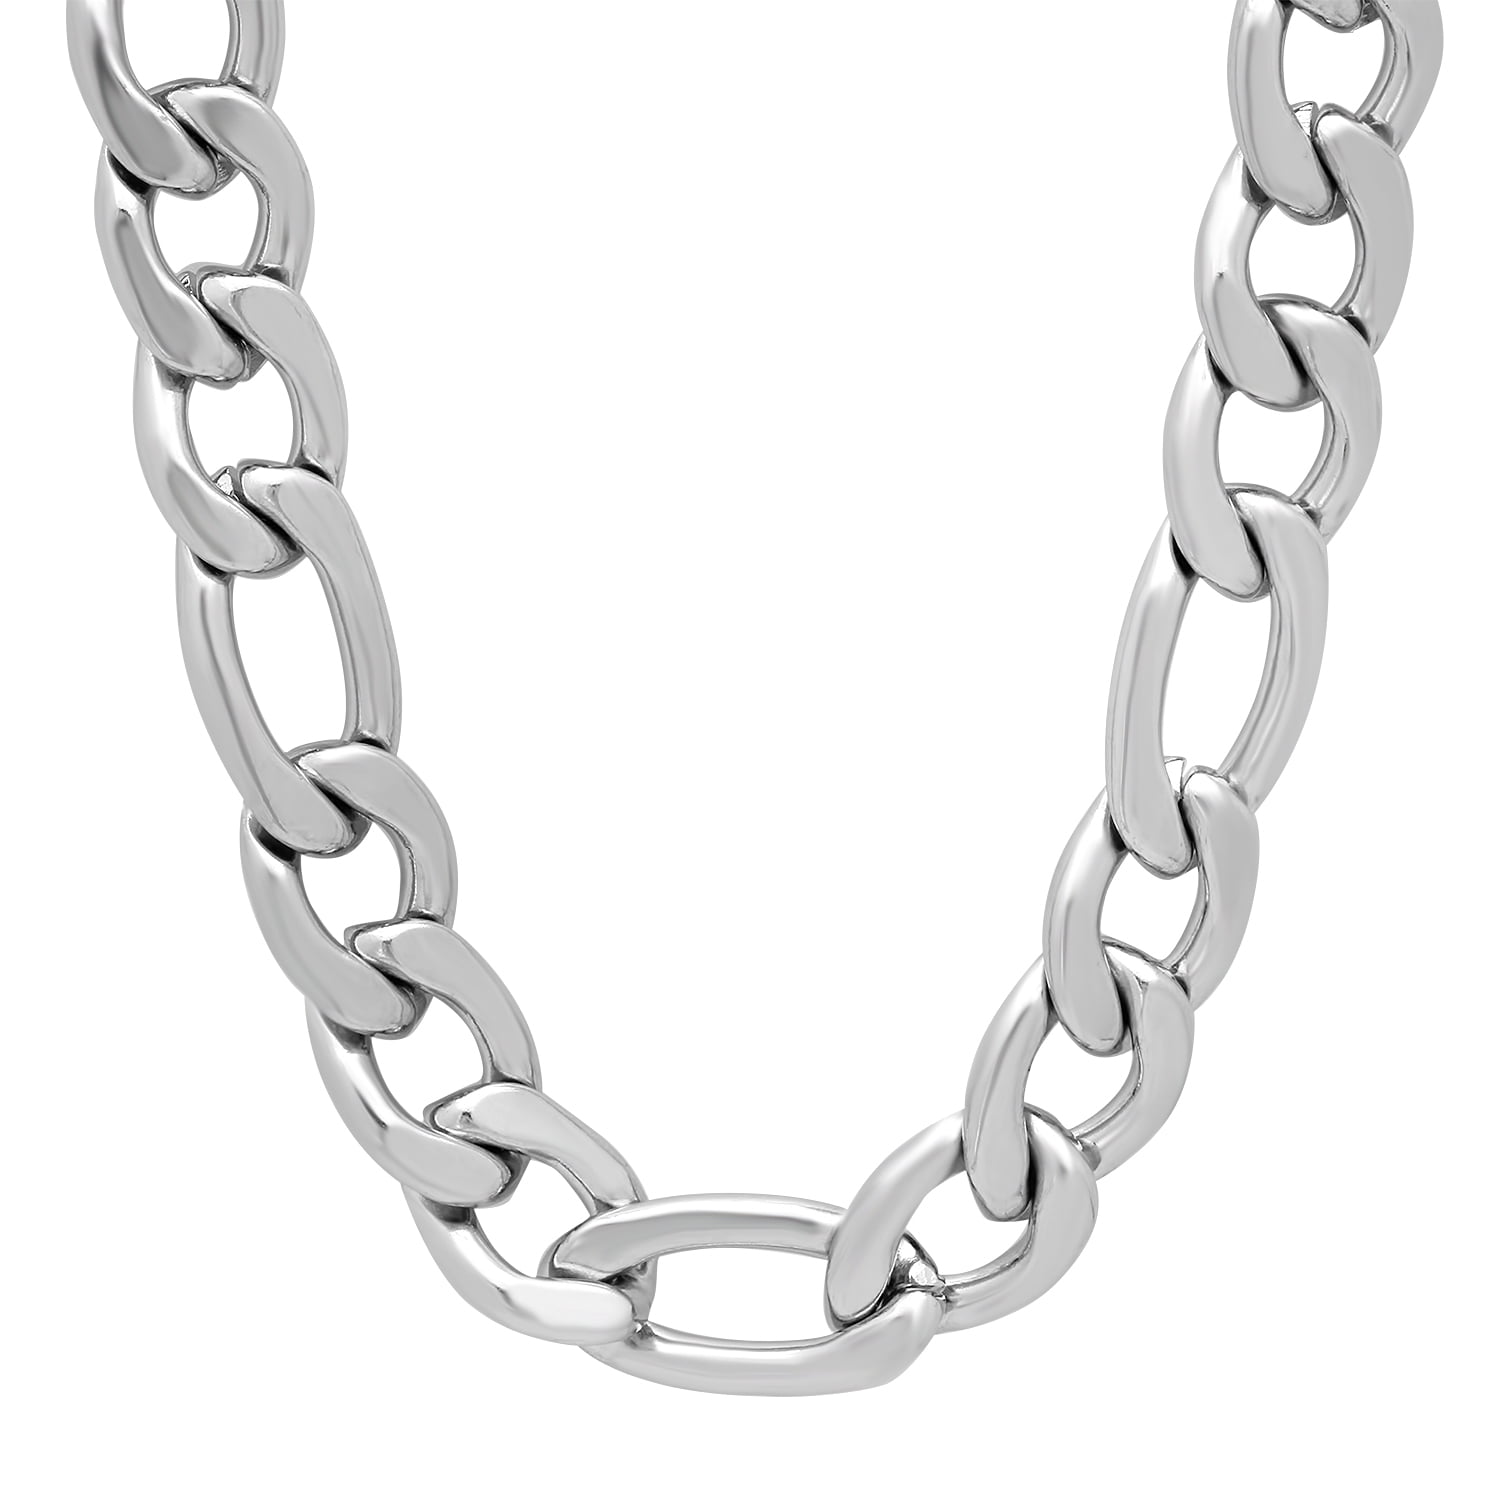 The Bling Factory - Men's 11.5mm High-Polished Stainless Steel Flat Mens Figaro Chain Stainless Steel